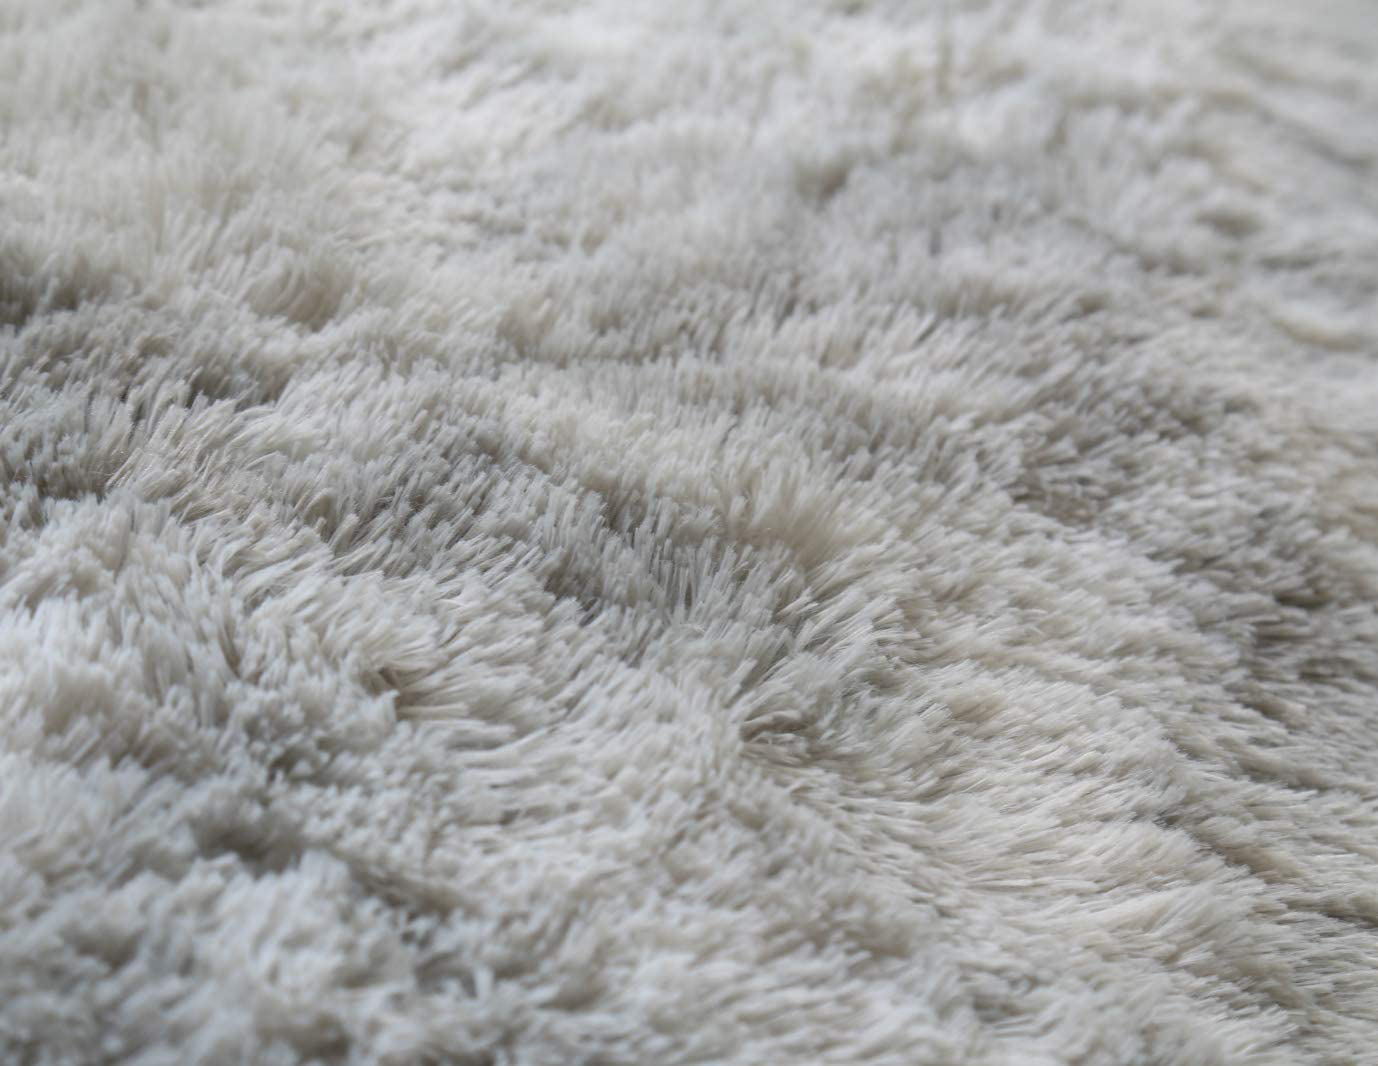 Soft Fluffy Area Rugs for Living Room,Plush Shaggy Nursery Rug Furry Throw Carpets for Kids Bedroom Fuzzy Rugs Indoor Home Decorate Mat… (5.3 ft x 7.5 ft, Grey-Lantern Shape)